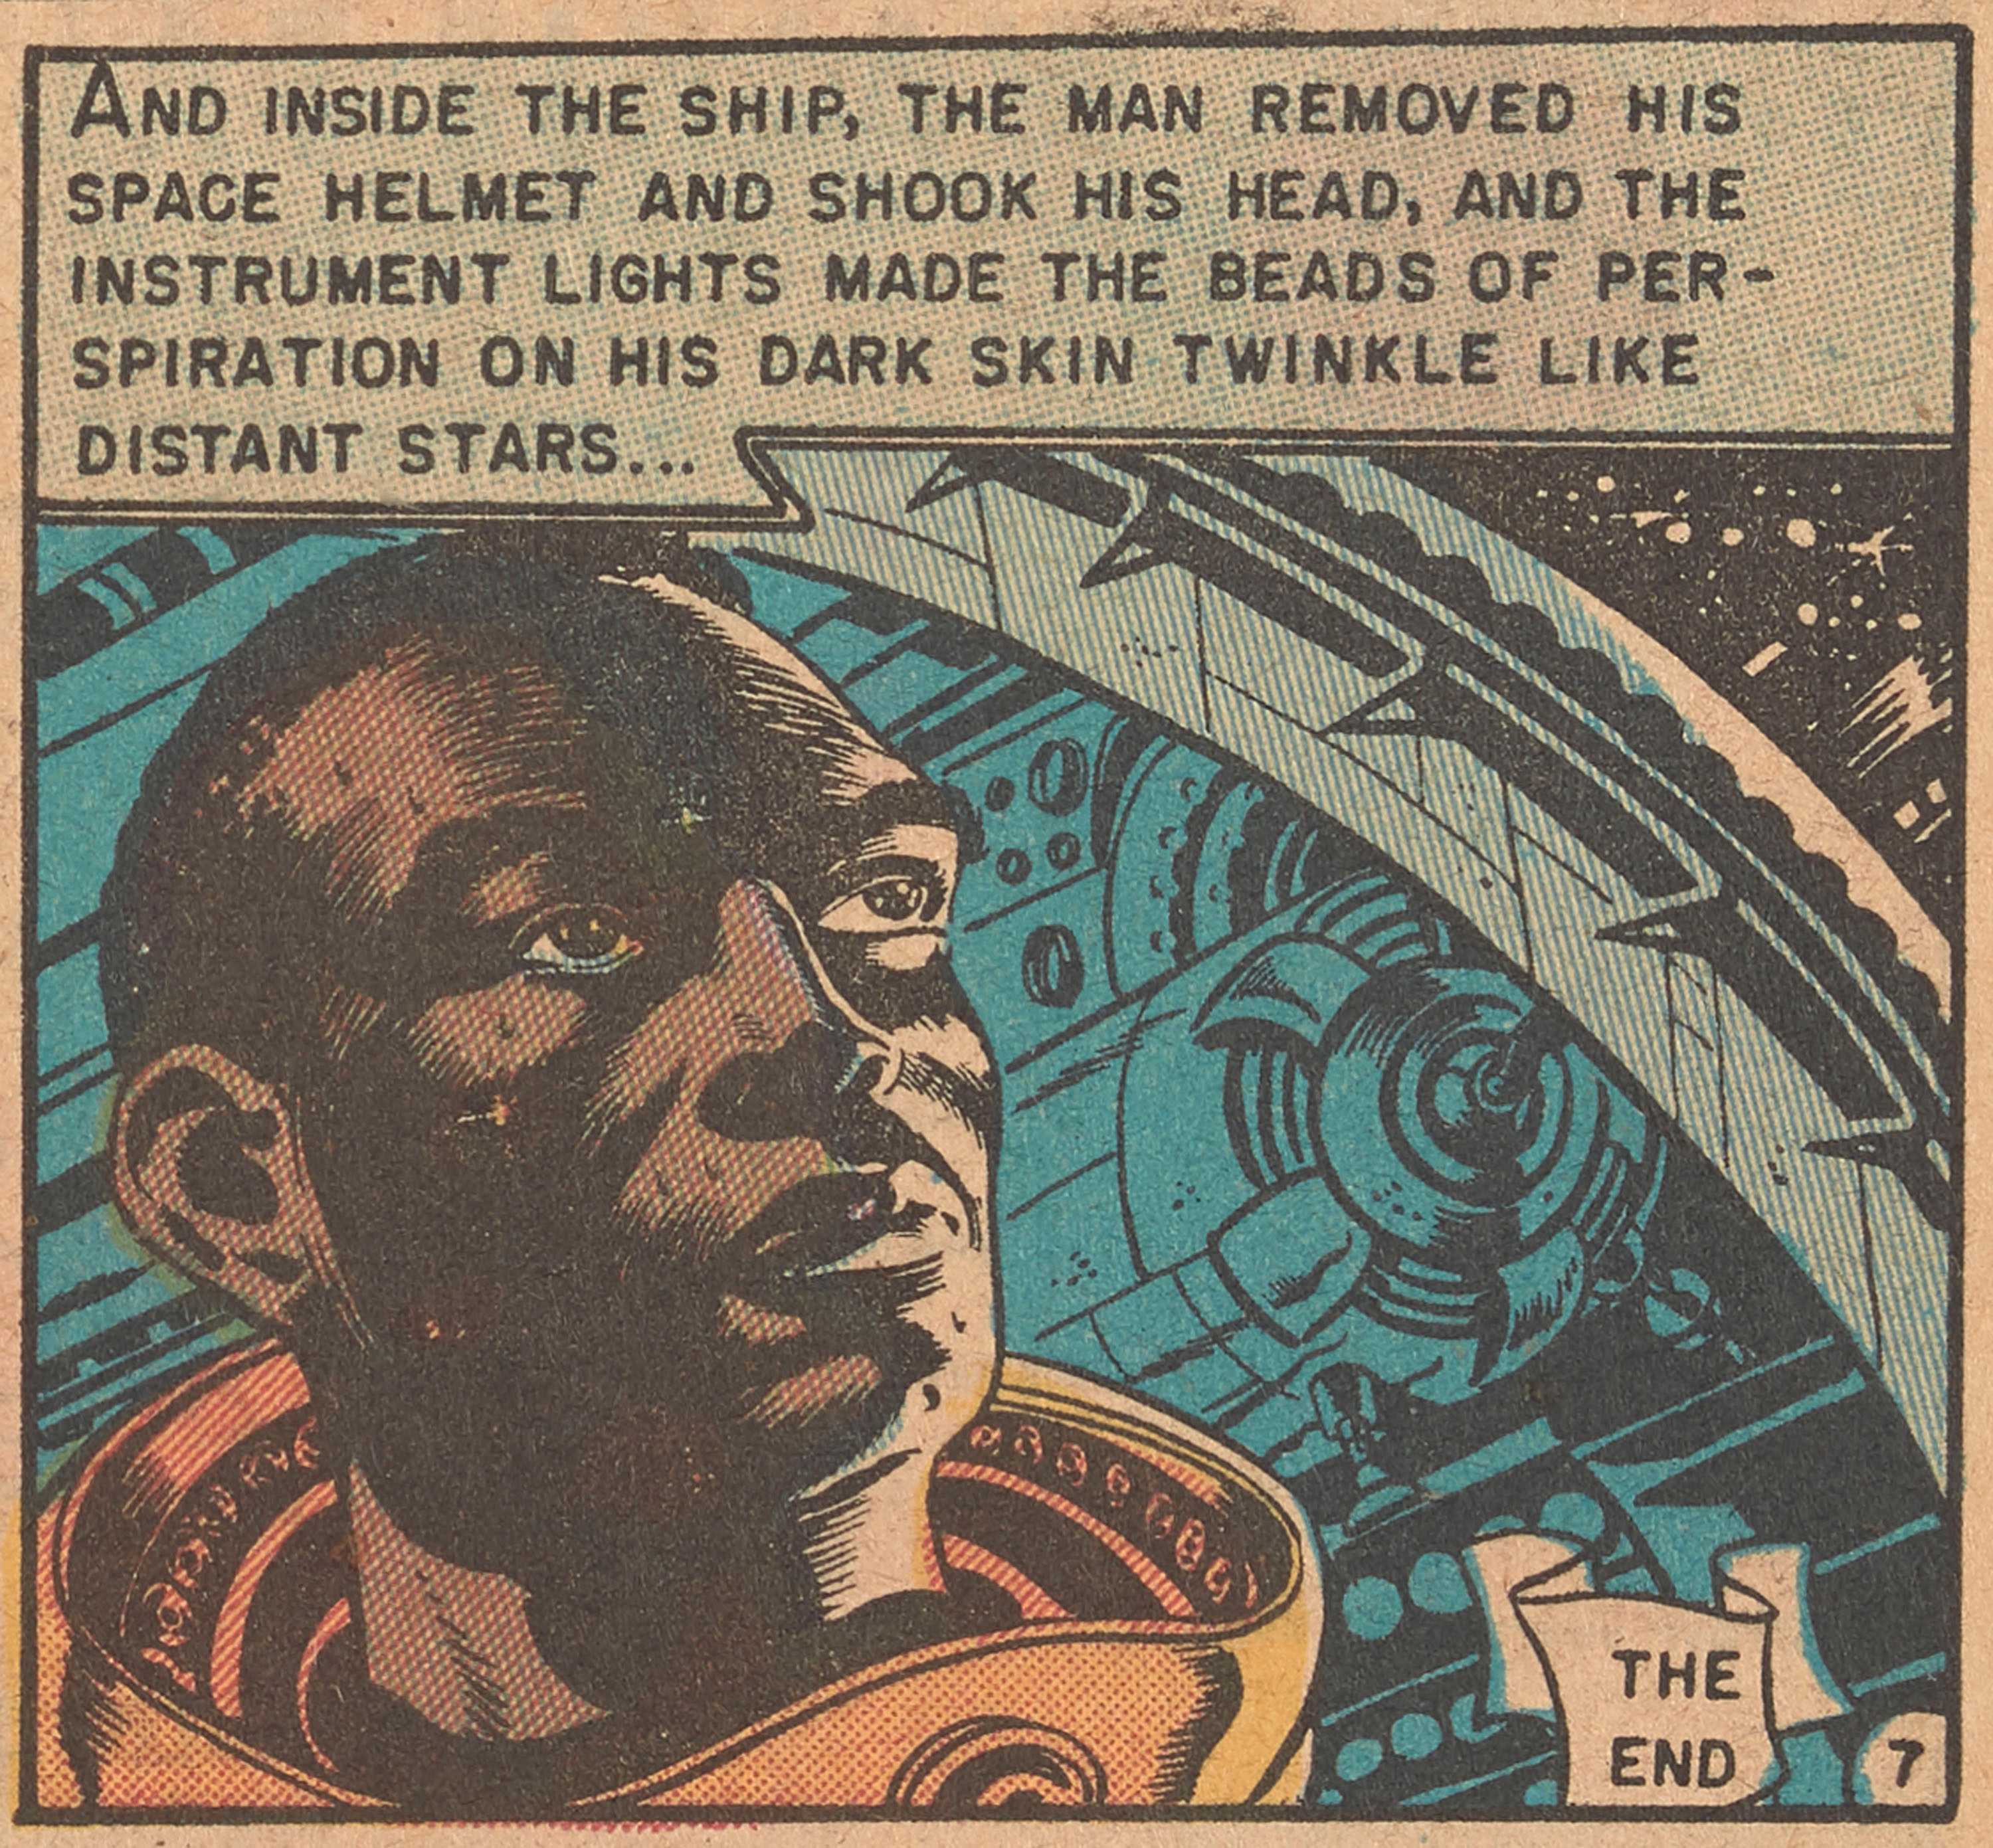 A panel of comic with a black astronaut staring into space from the space shift. Comic text is on the top of the panel.